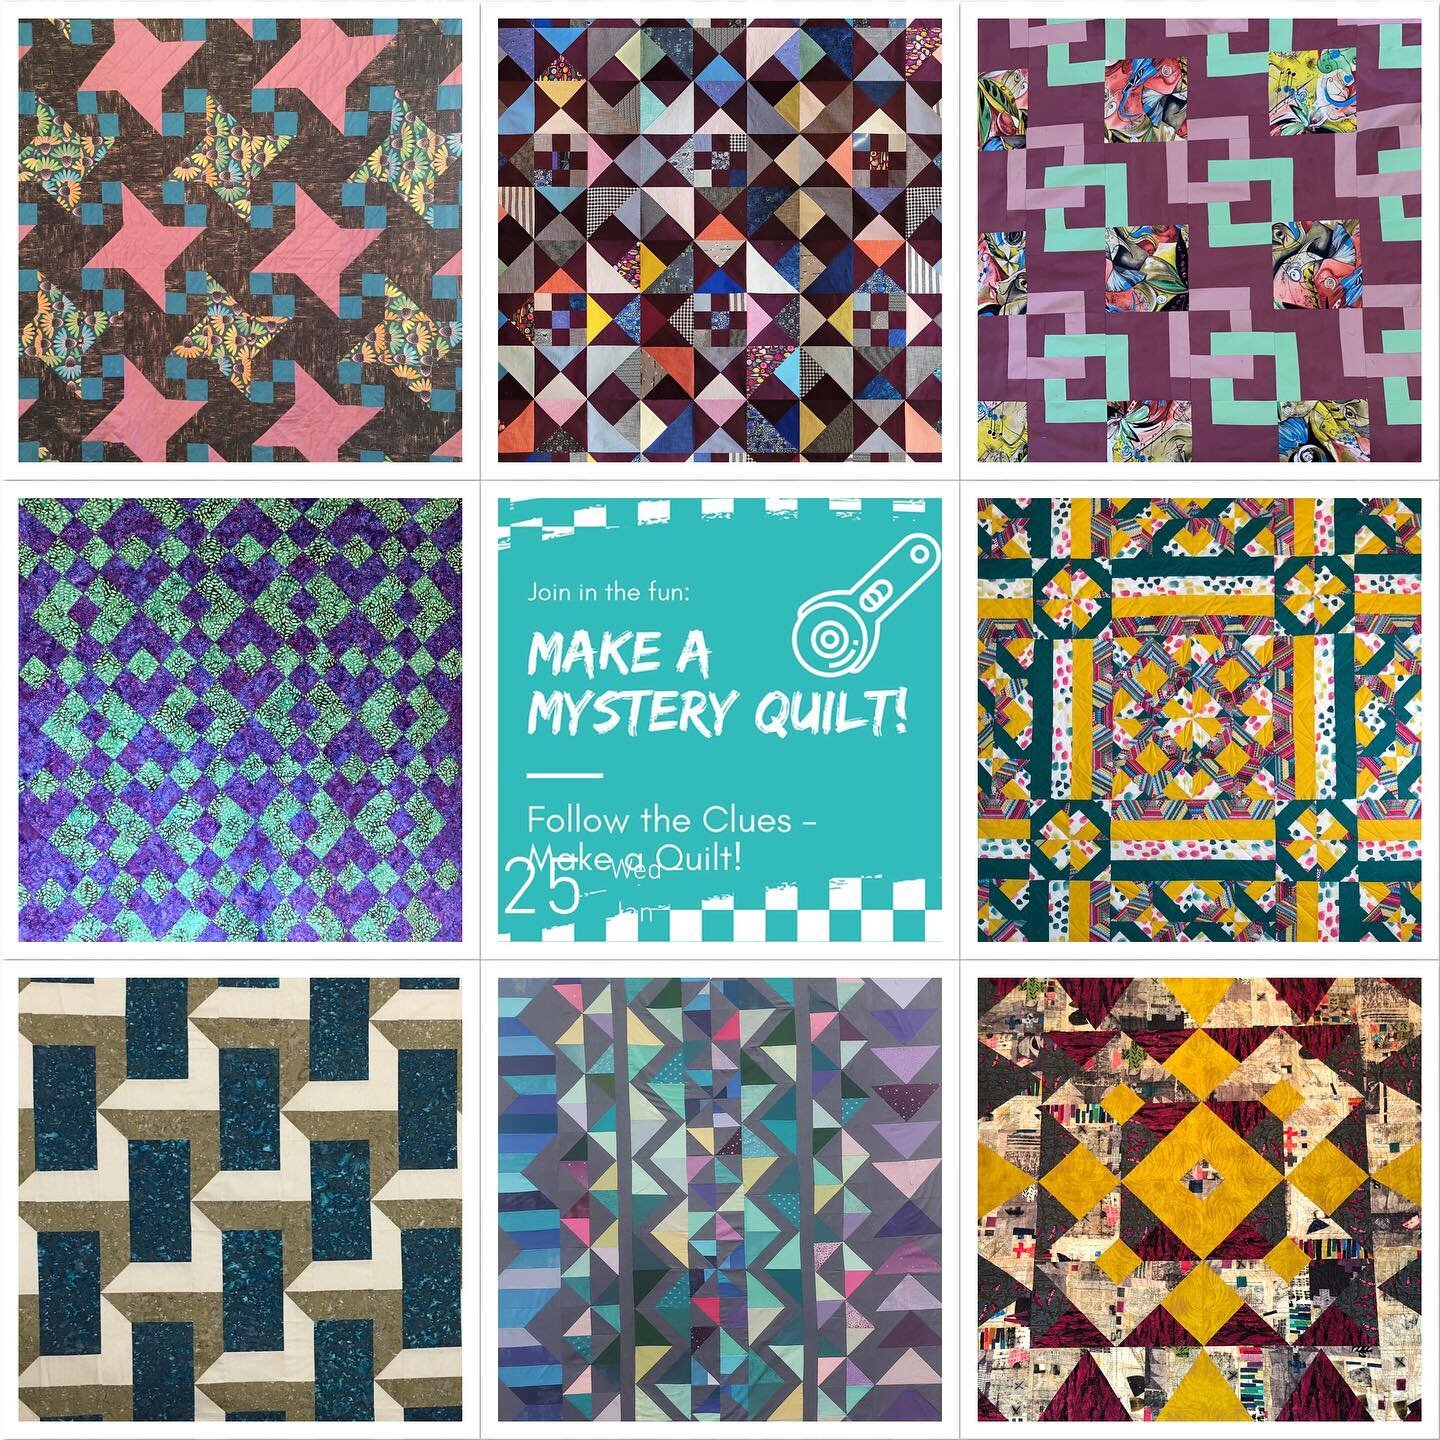 Join us for a fun and gentle ride @hellostitchstudio online Mystery Quilt Class - starts this Wednesday evening Jan 25.
Sign up at 
www.hellostitchstudio.com/sewing-classes 
Every week - new clue
At the end - a finished quilt top
In between - hang ou